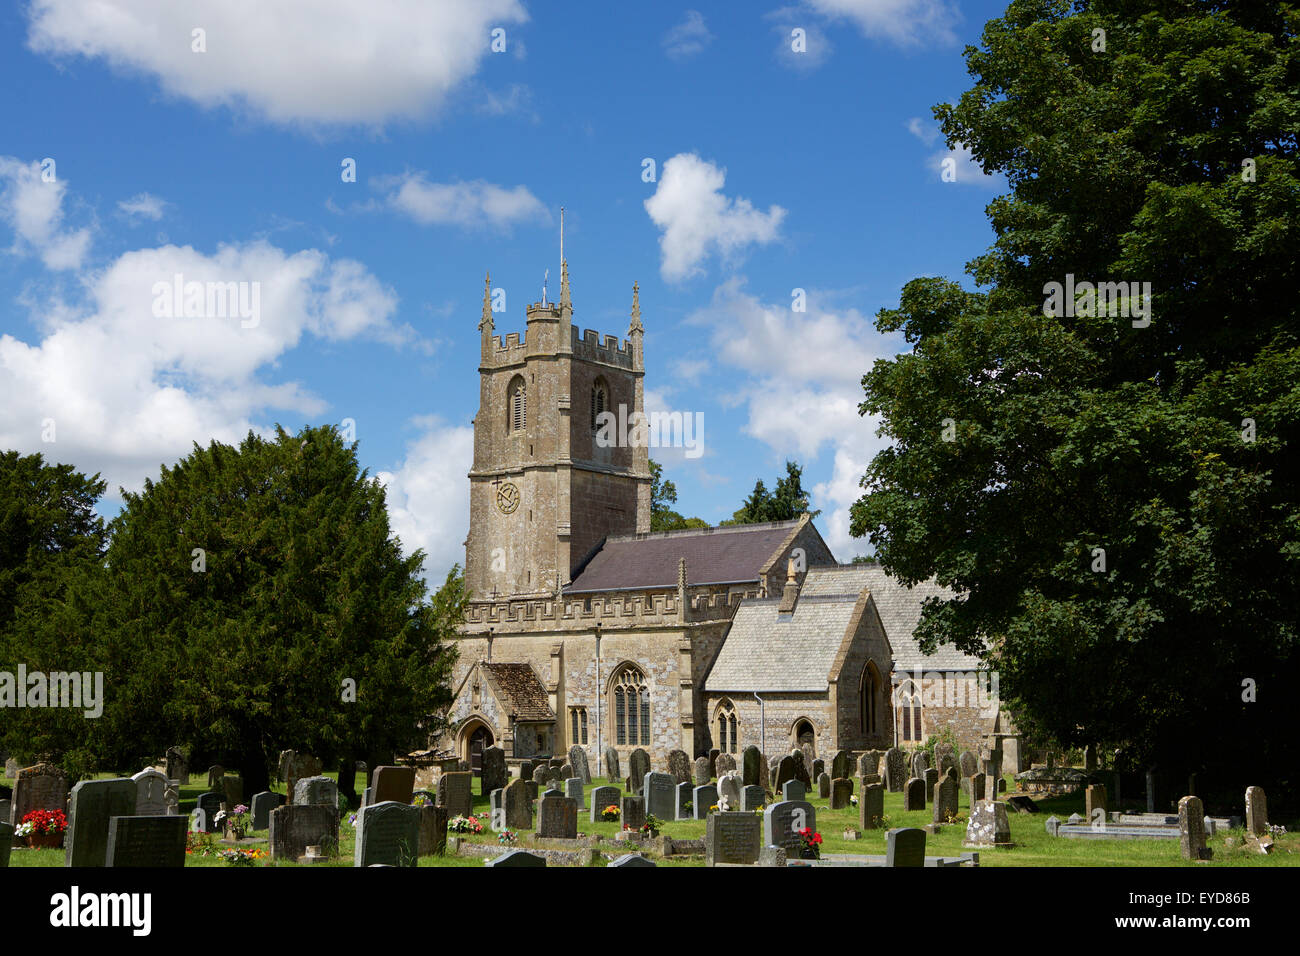 View of the St James Church in the village of Avebury. Stock Photo